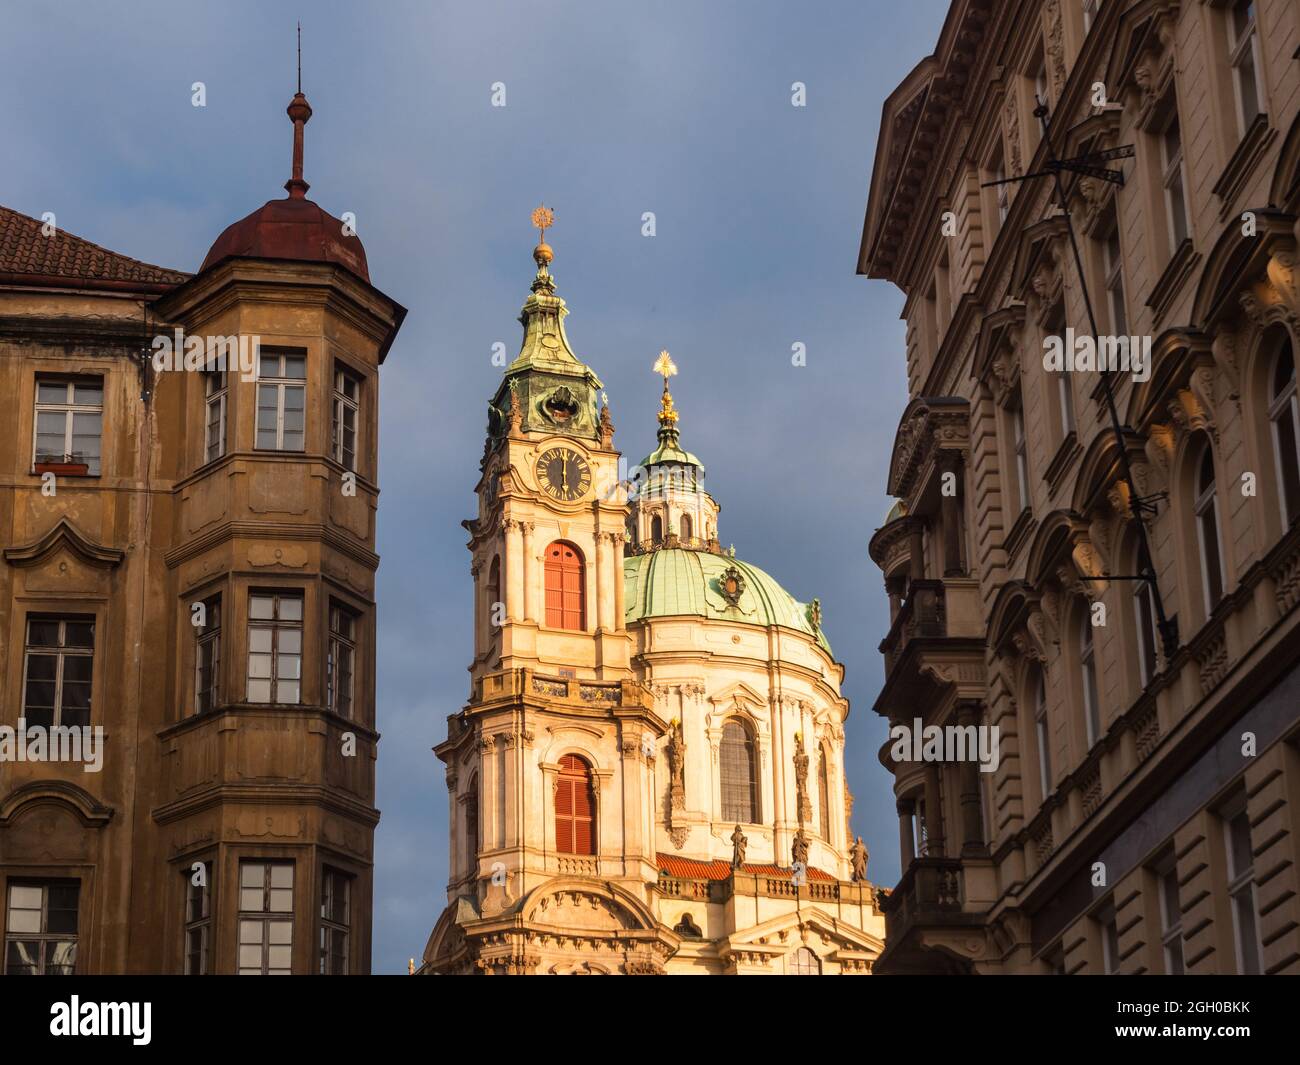 Baroque Dome and Spire of Saint Nicholas Church in the Lesser Town of Prague, Czech Republic in the Morning Stock Photo